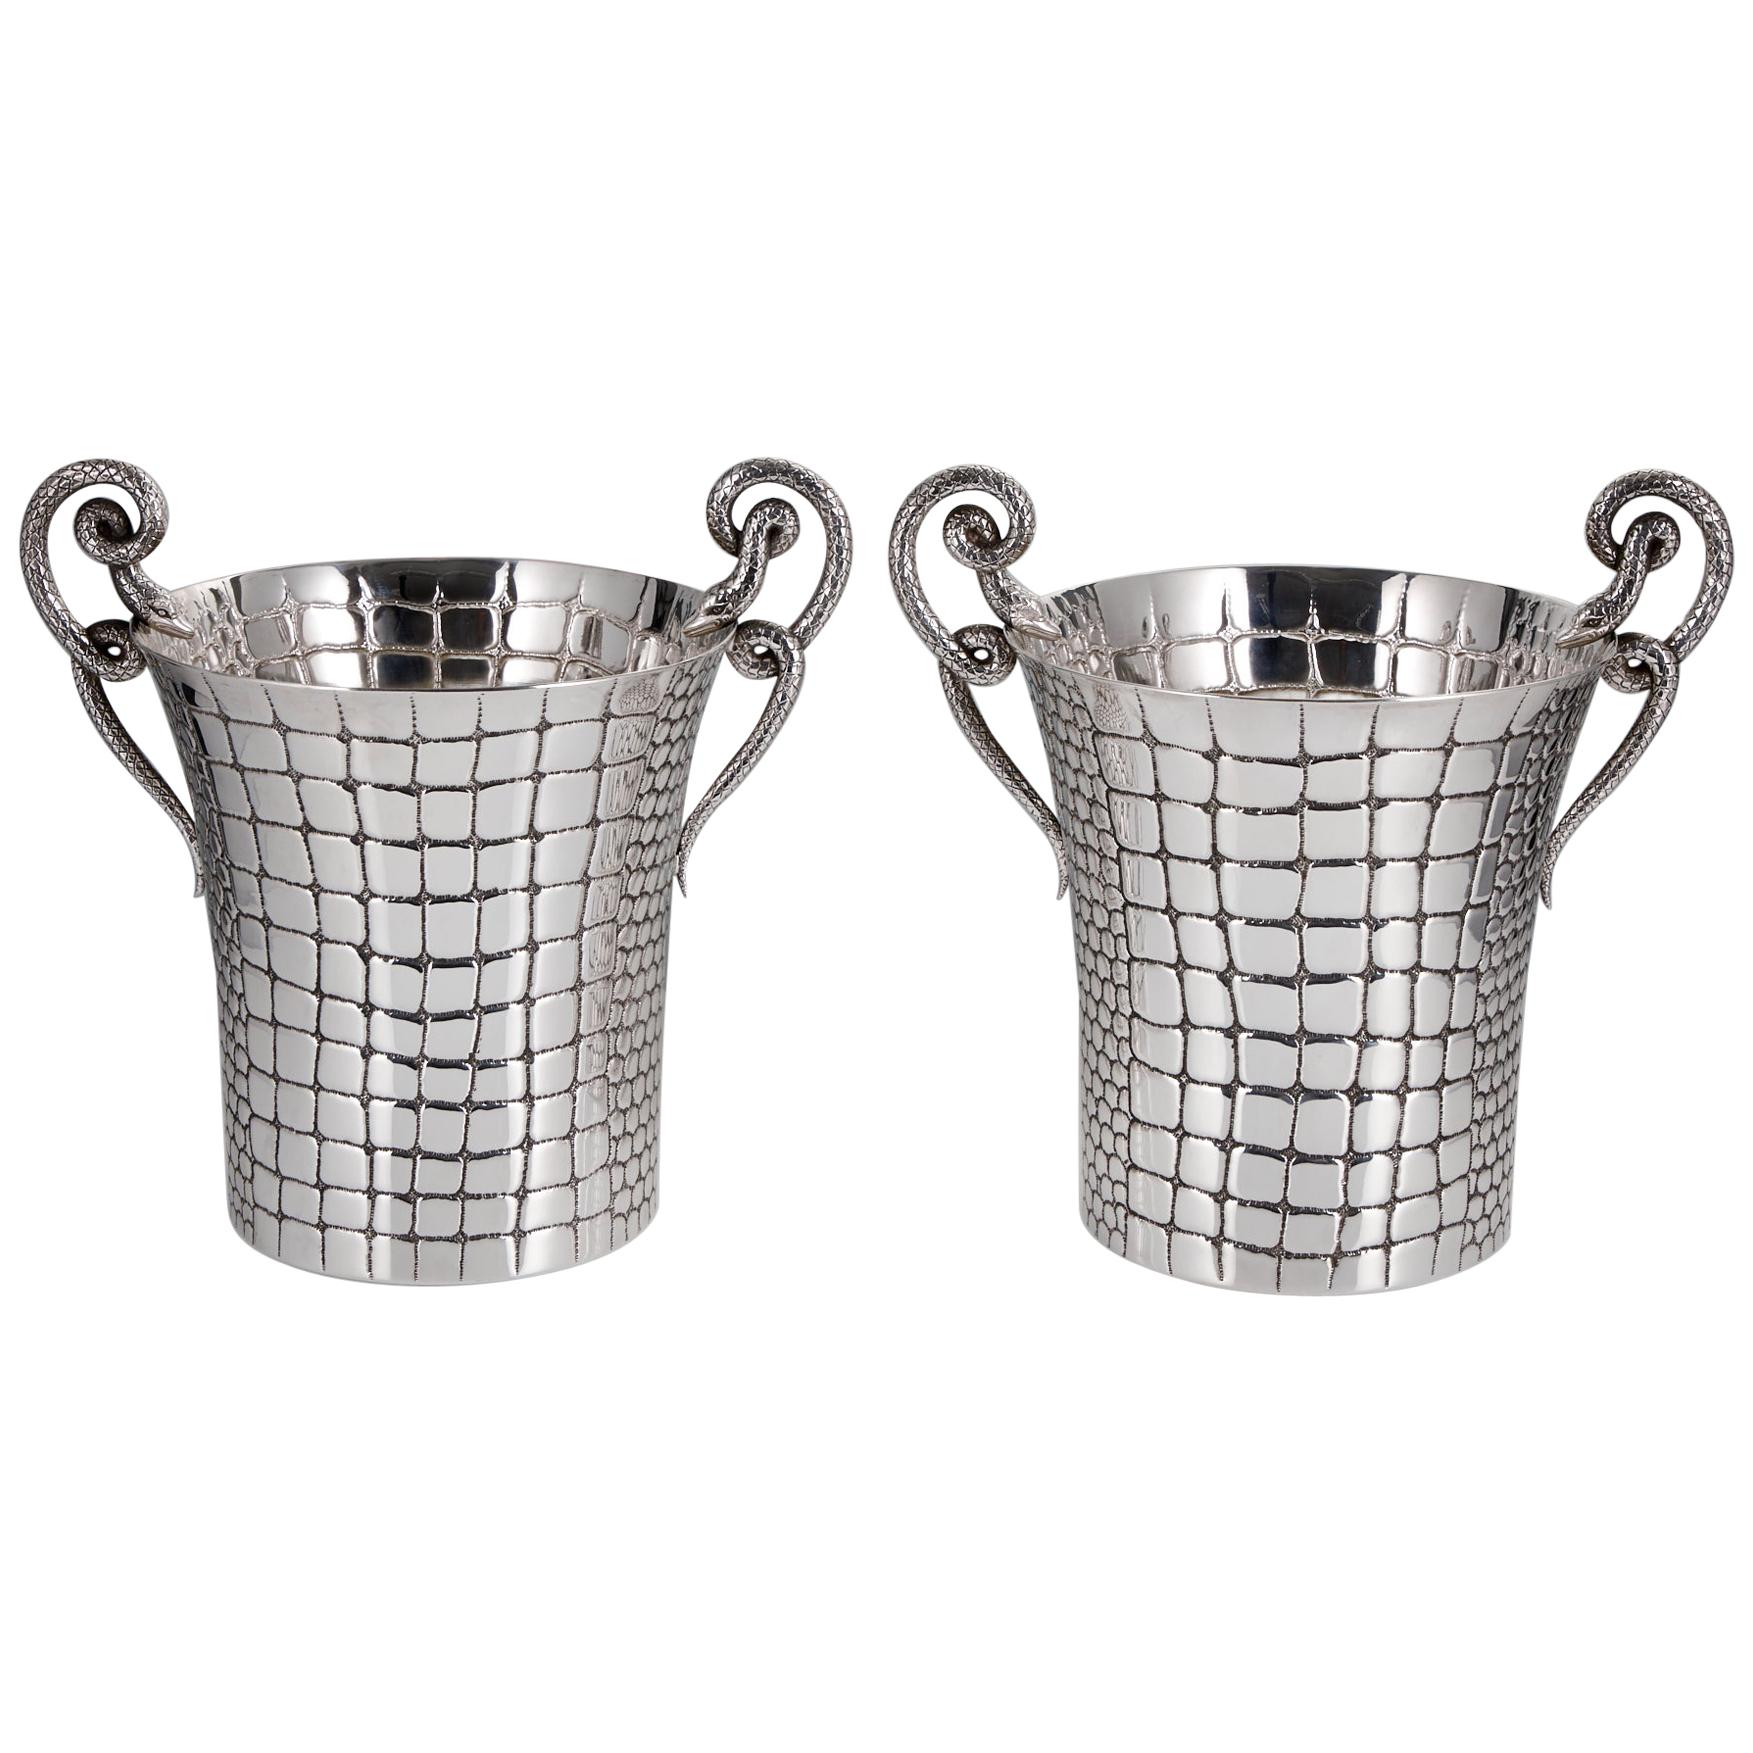 Mid-20th Century Silver Champagne Cooler Pair by Paolo Scavia Circa 1945-1950  For Sale